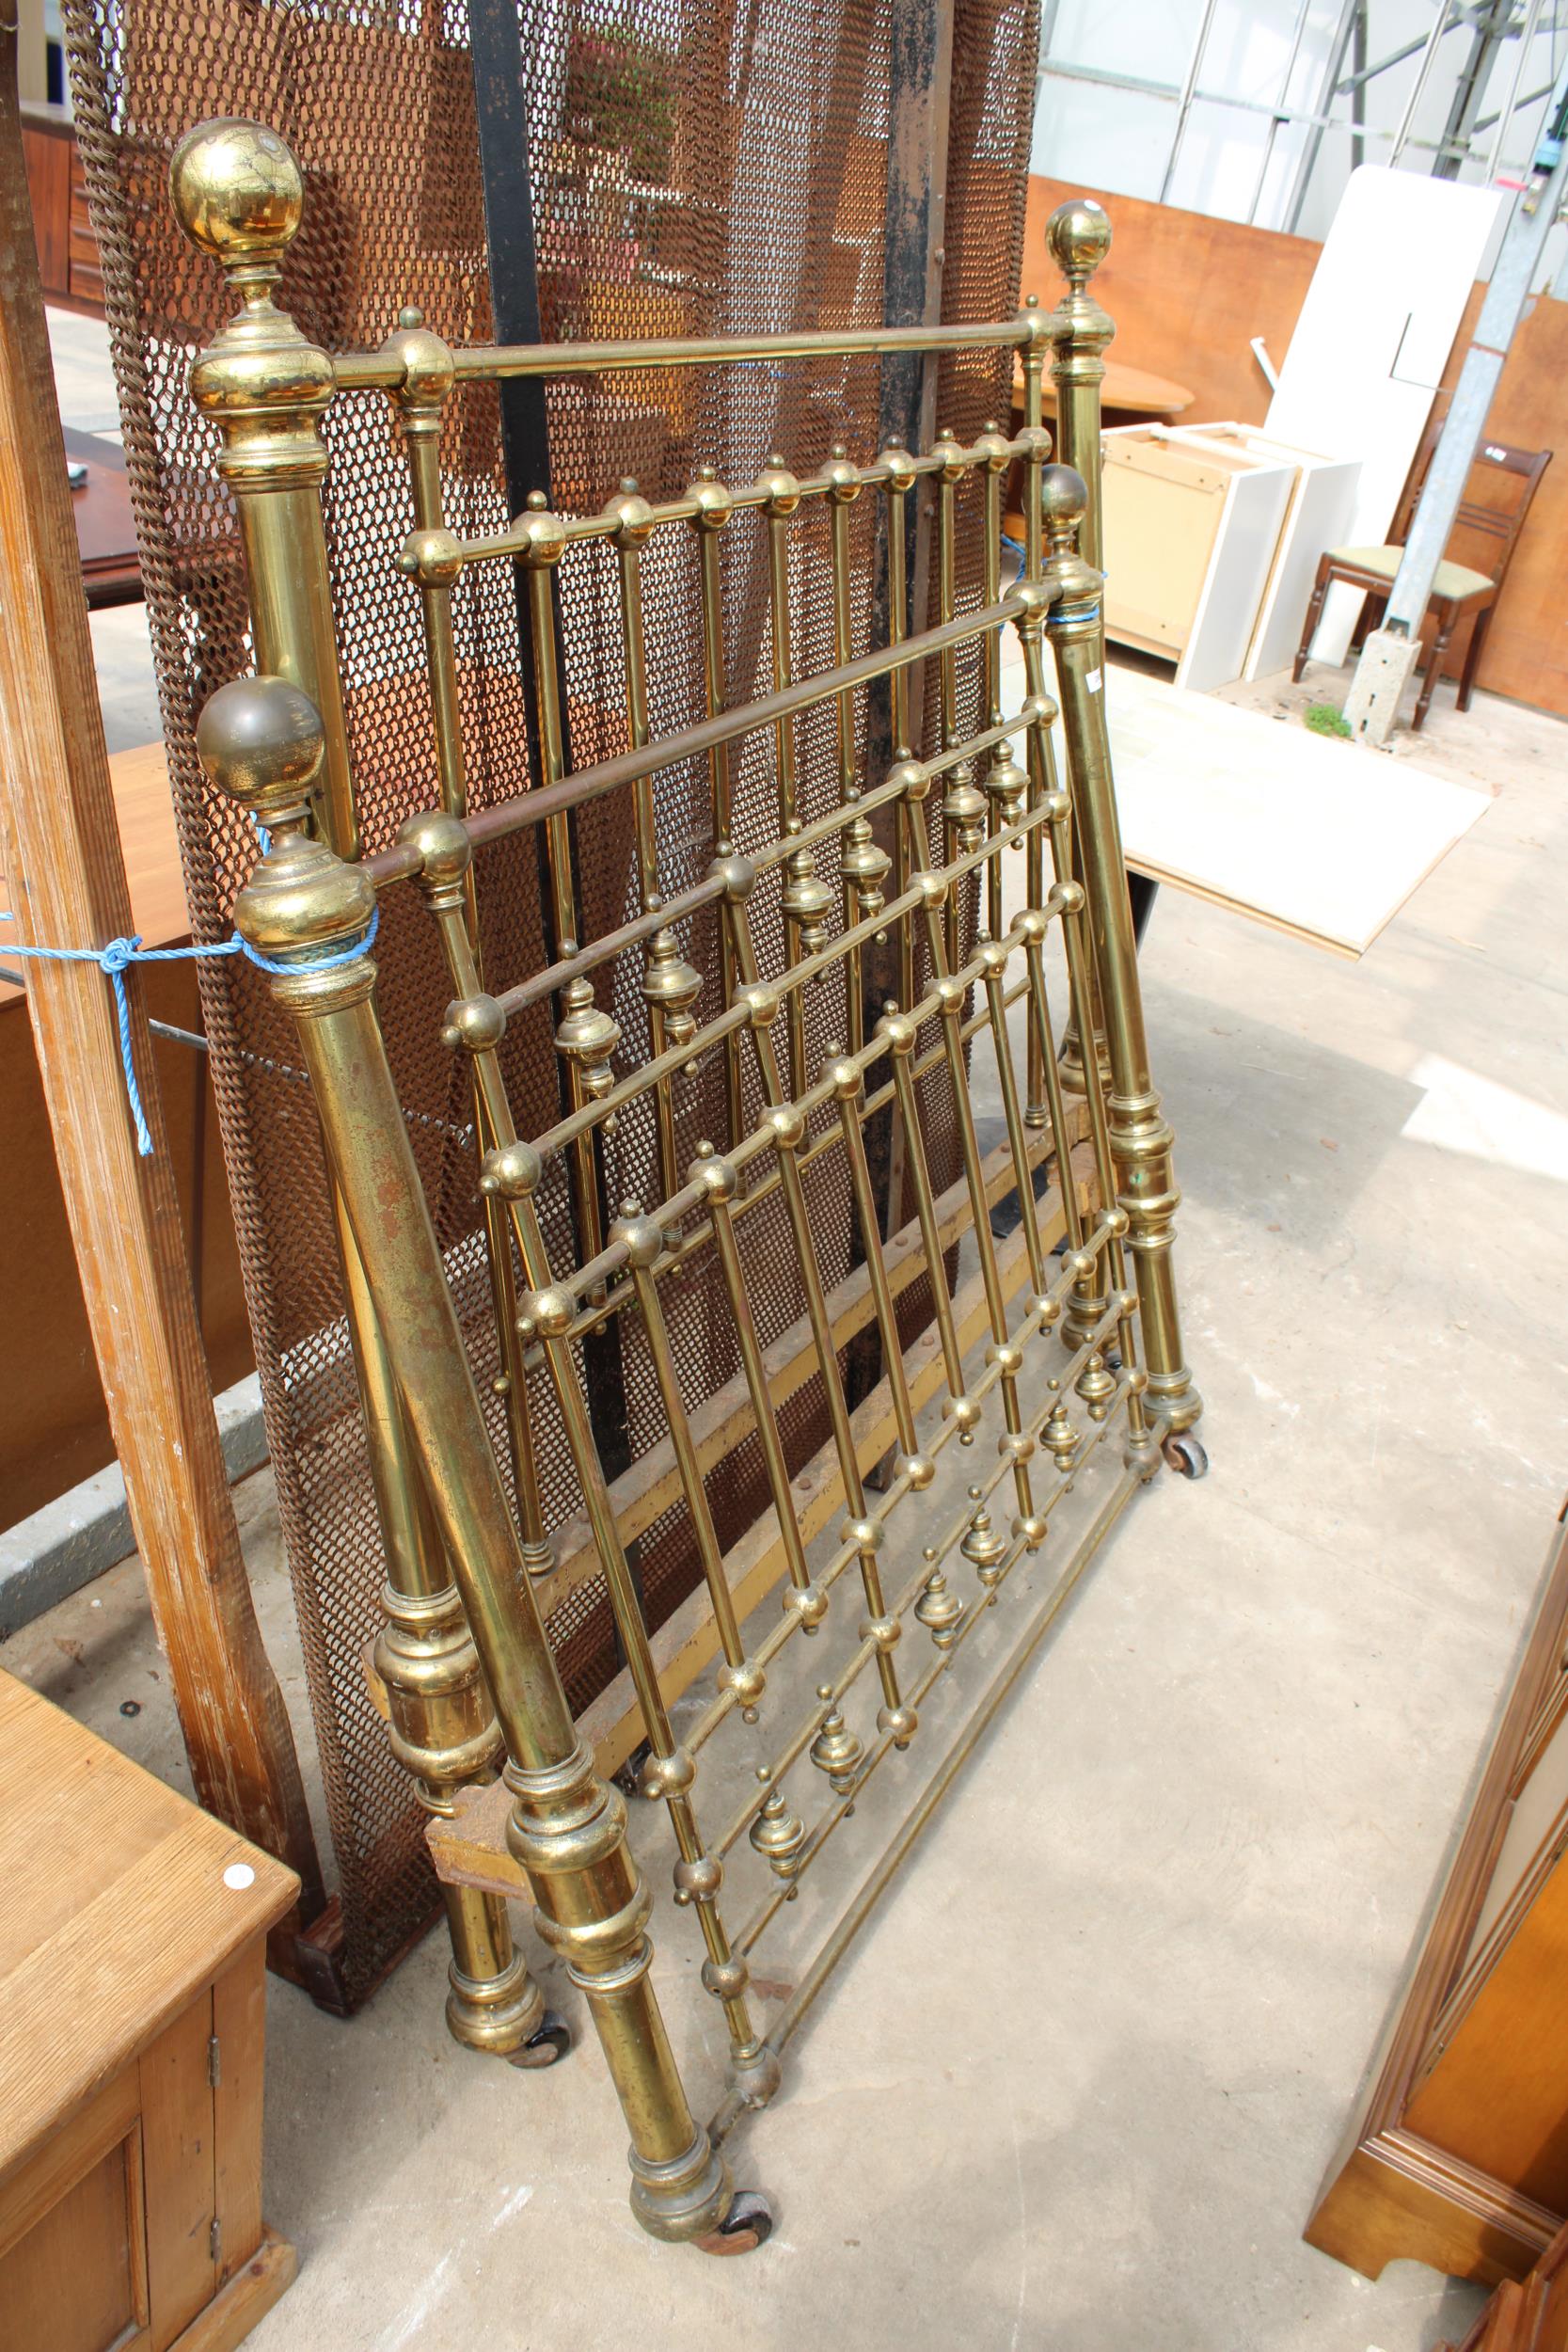 A VICTORIAN 4'6" BRASS BEDSTEAD - Image 2 of 3